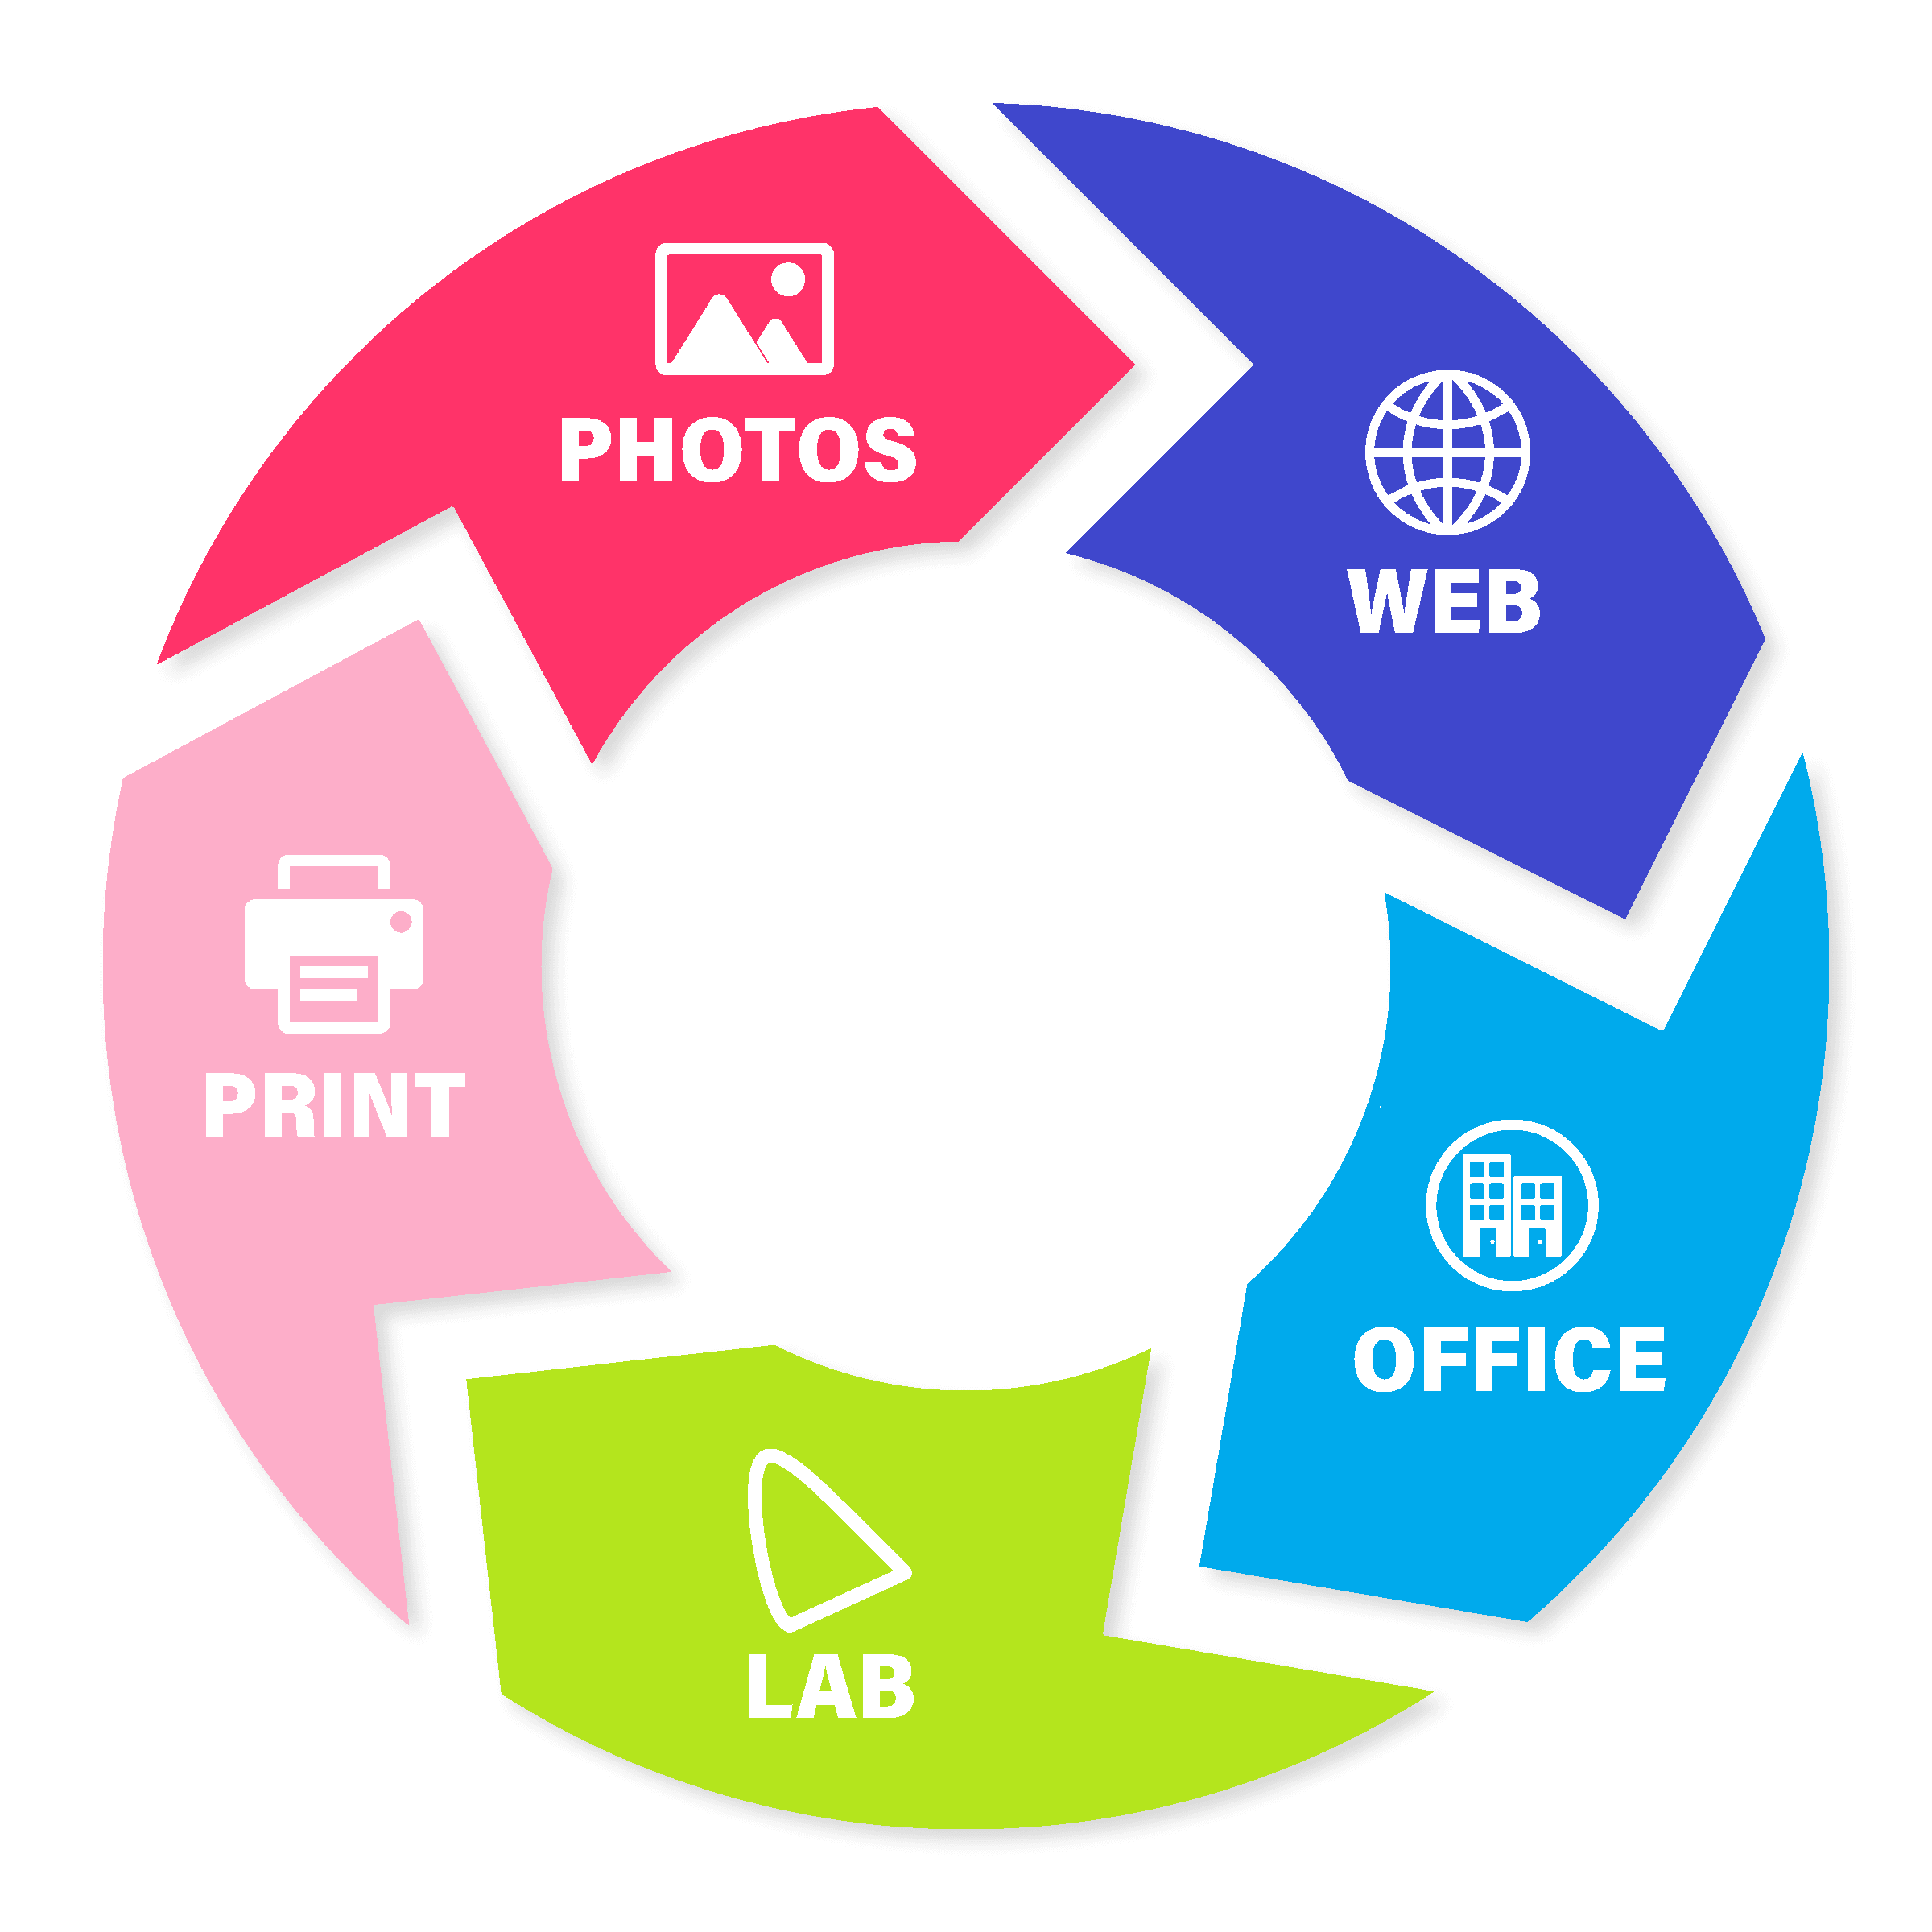 Link all the processes of capture, edit and print in the business